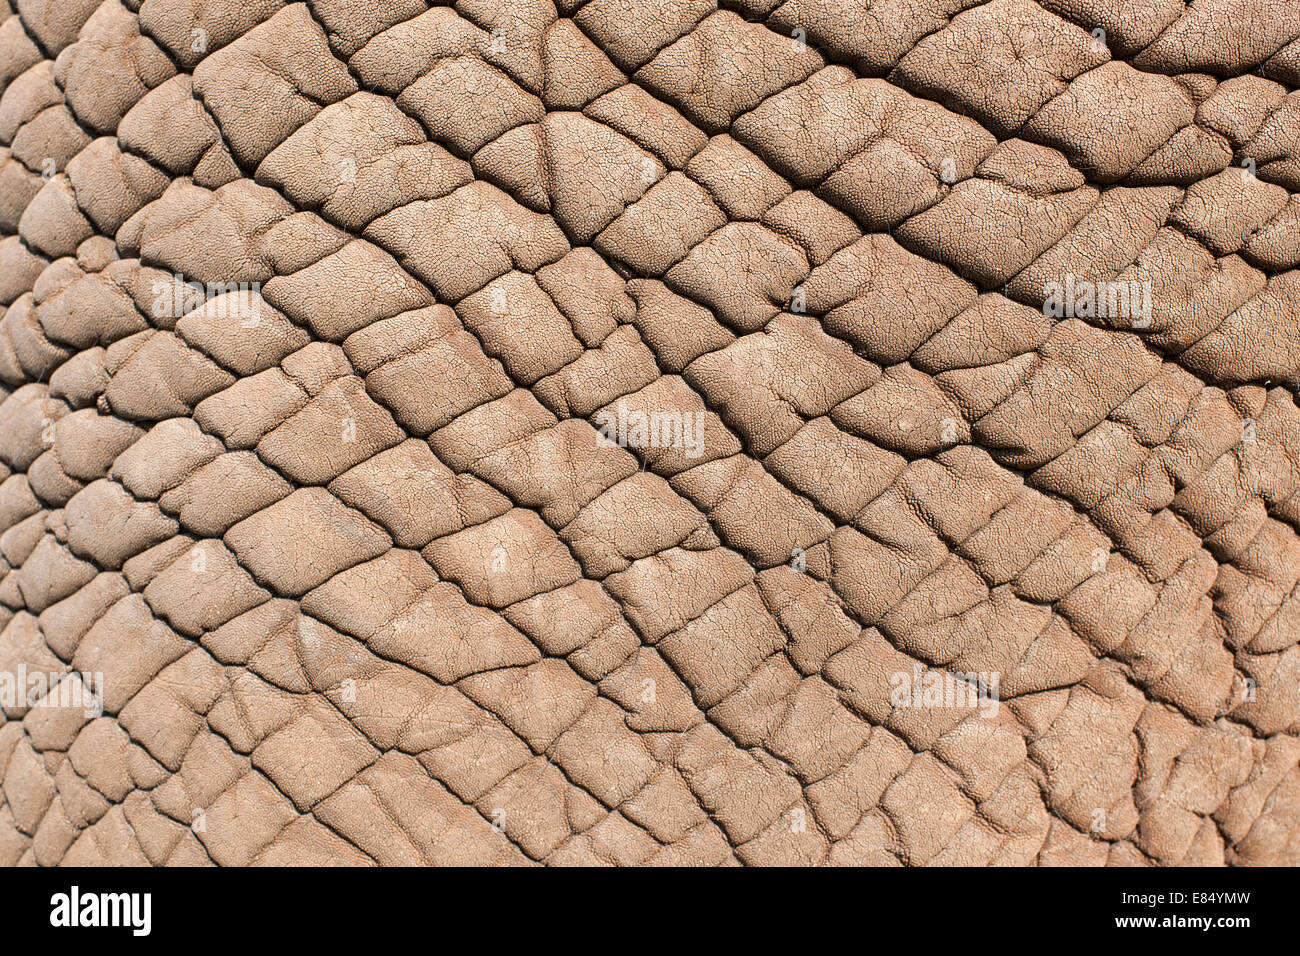 Close-up of the hide of an elephant. Stock Photo